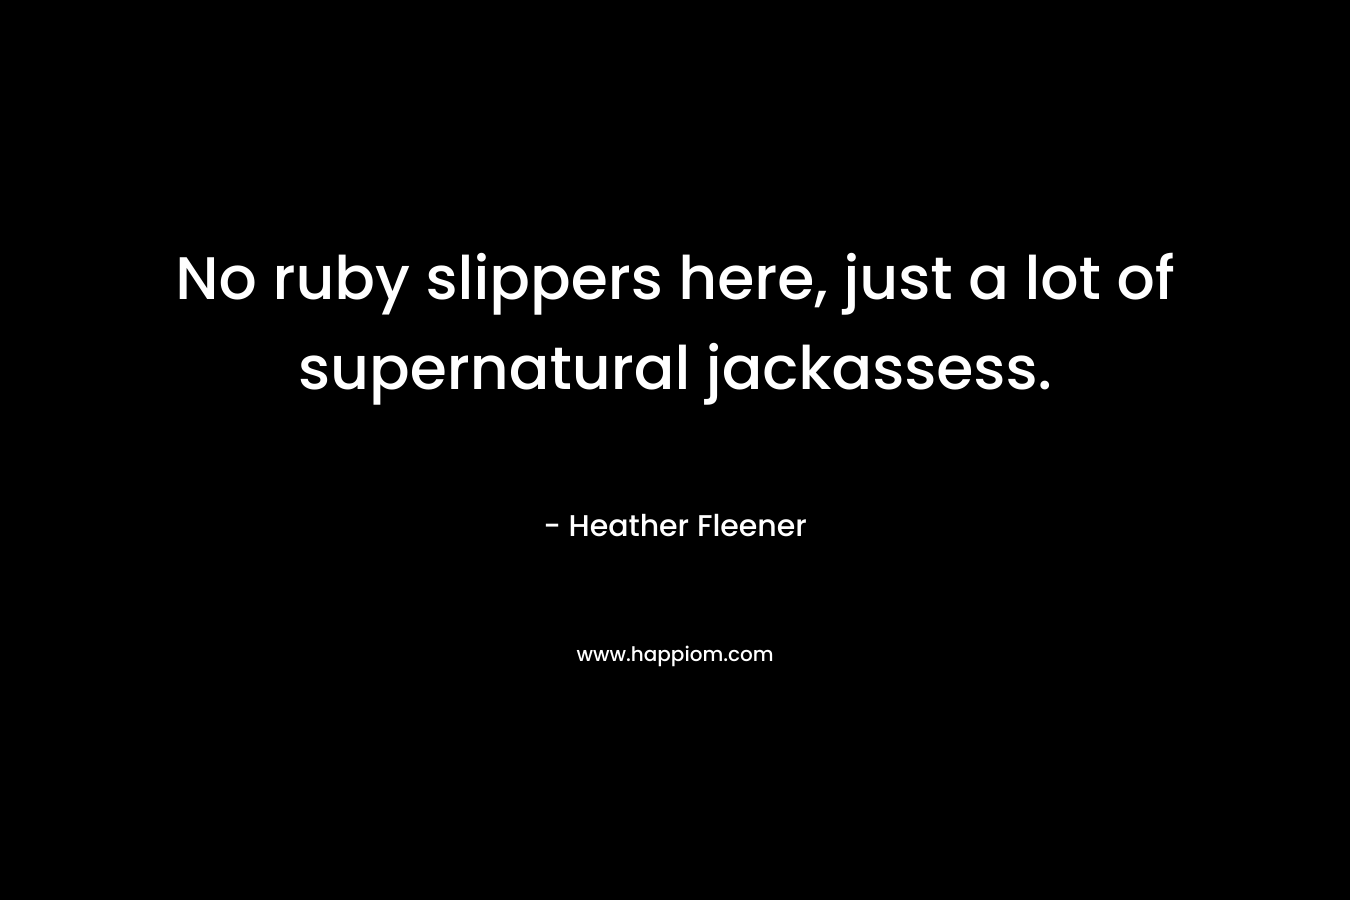 No ruby slippers here, just a lot of supernatural jackassess.